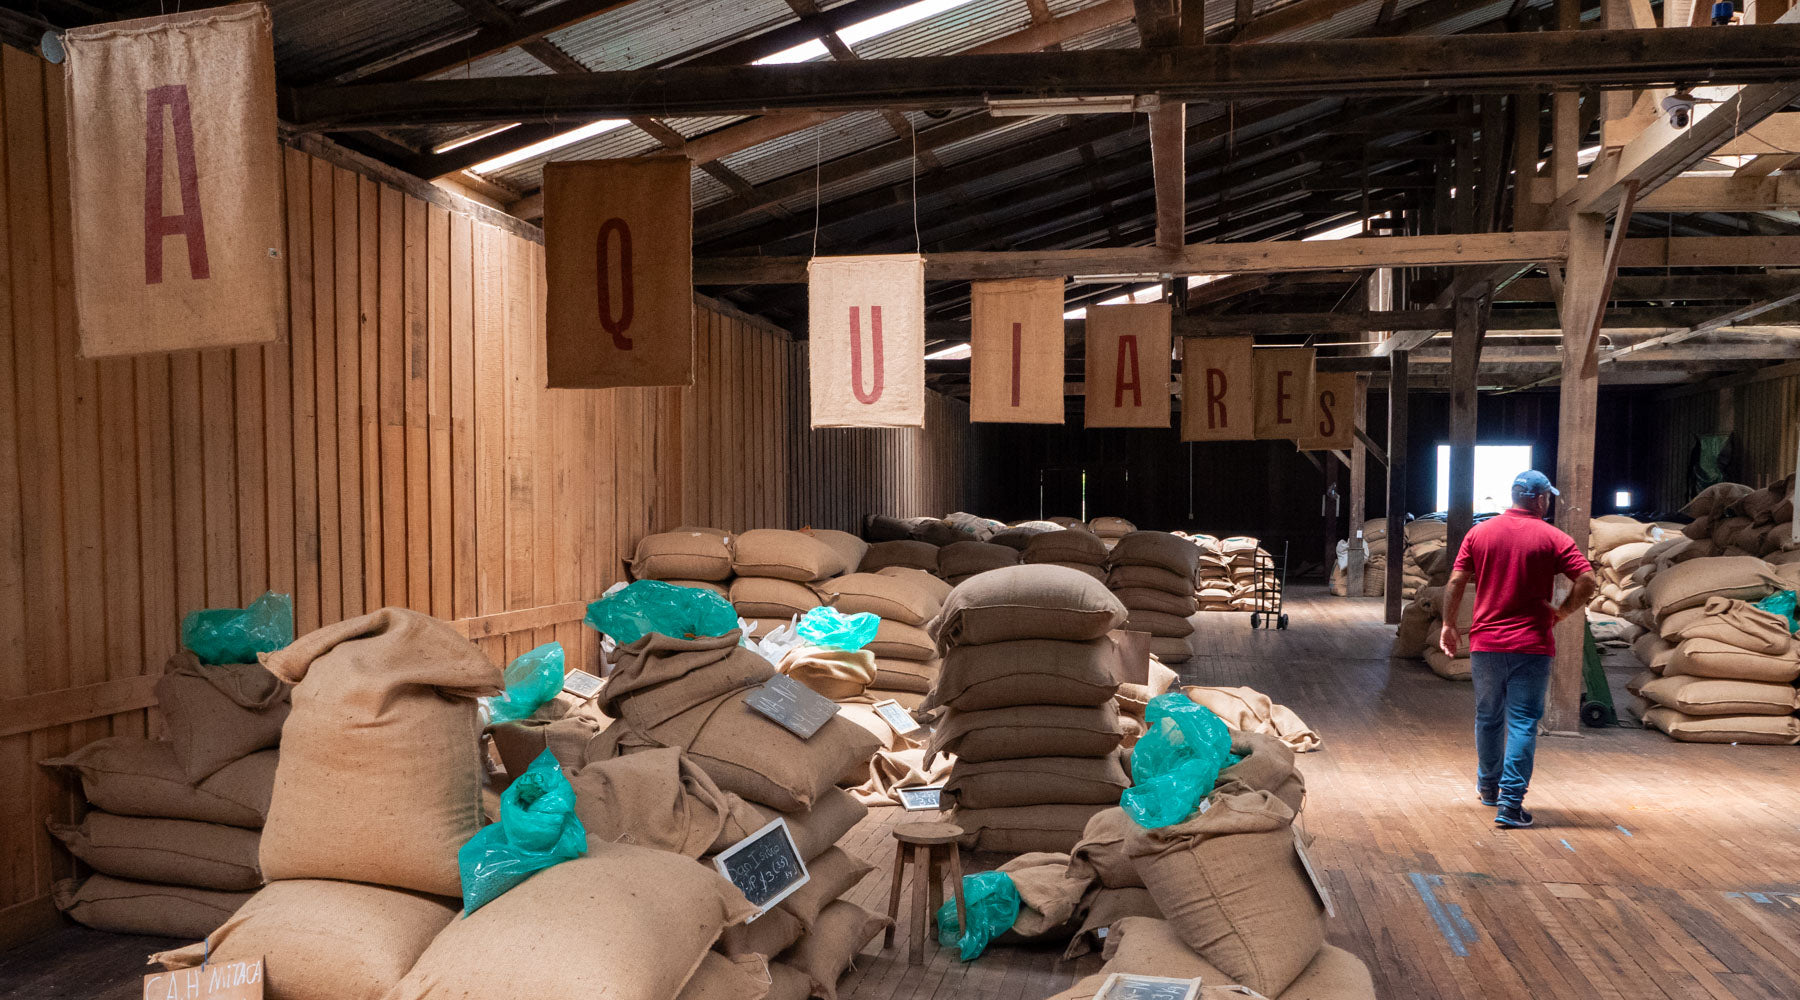 A view of the coffee storage area at the milling facility on Aquiares Estate coffee farm, Costa Rica. The room is wooden and warm, with stacks of burlap coffee bags piled high, ready for export around the world.